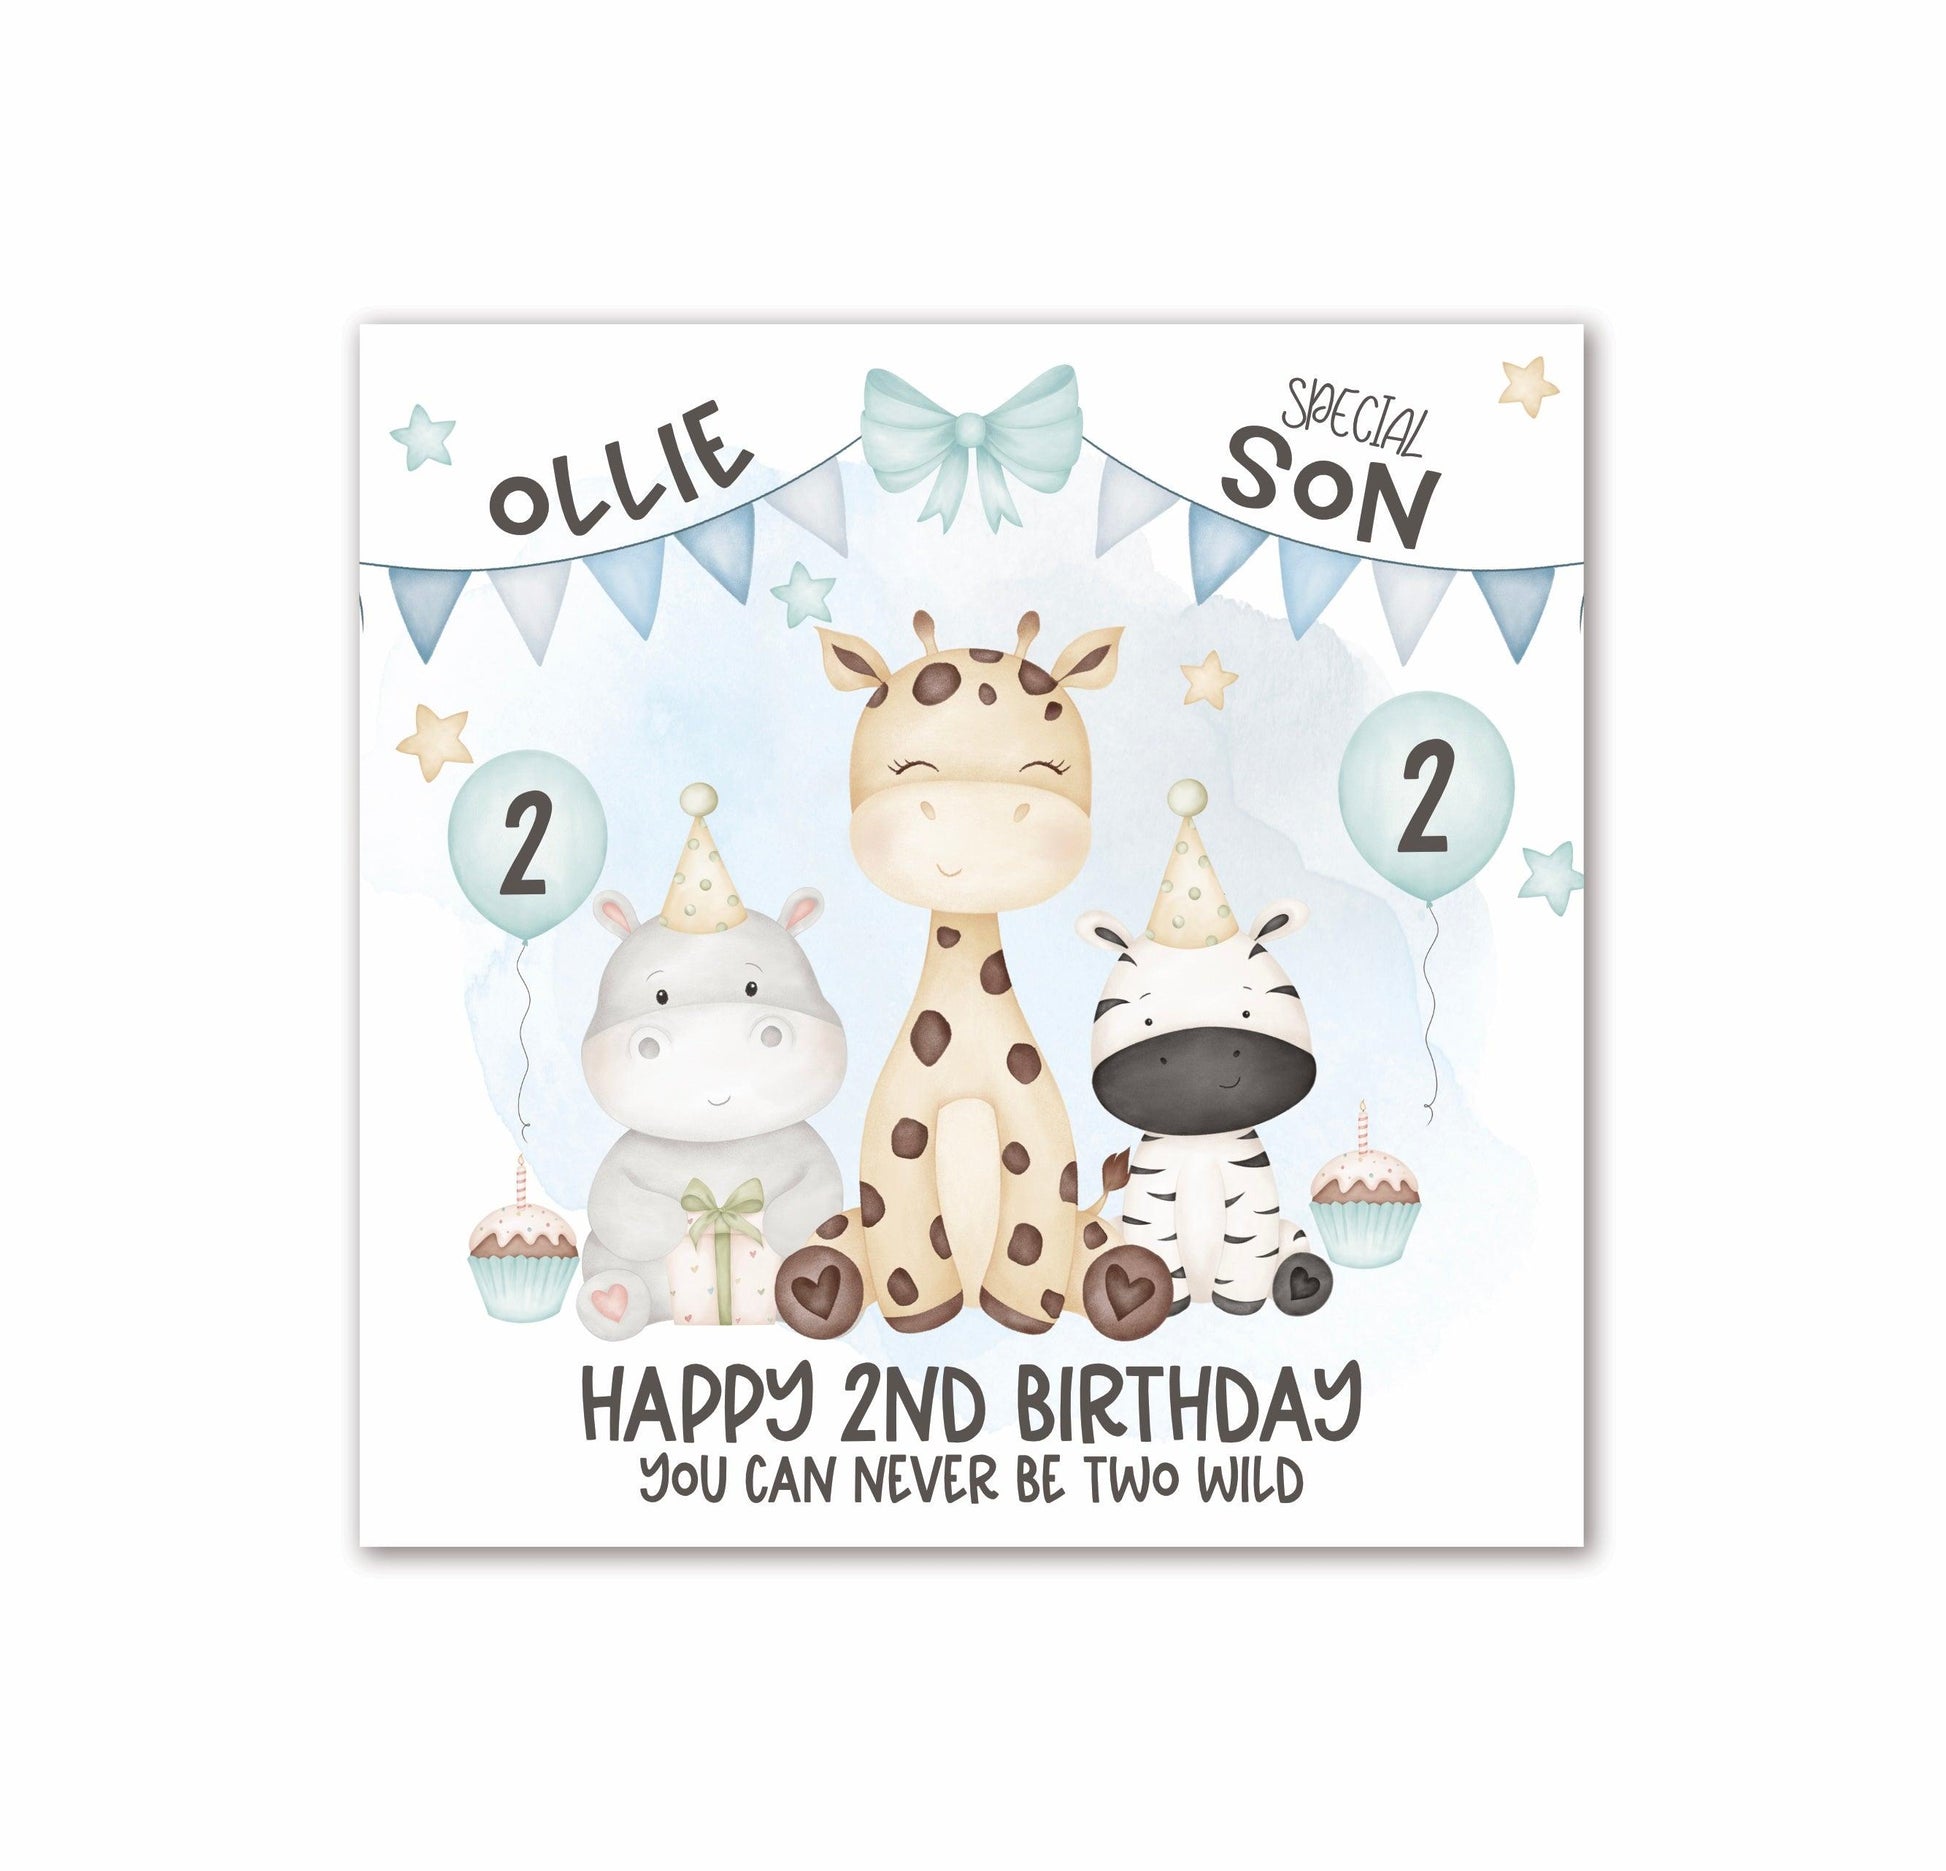 Safari Animals 2nd Birthday Card in BLUE, Personalised with a Name, Special SON, Happy 2nd Birthday Card, YOU CAN NEVER BE TWO WILD, Giraffe, Rhino & Zebra [Oliver Rose Designs]